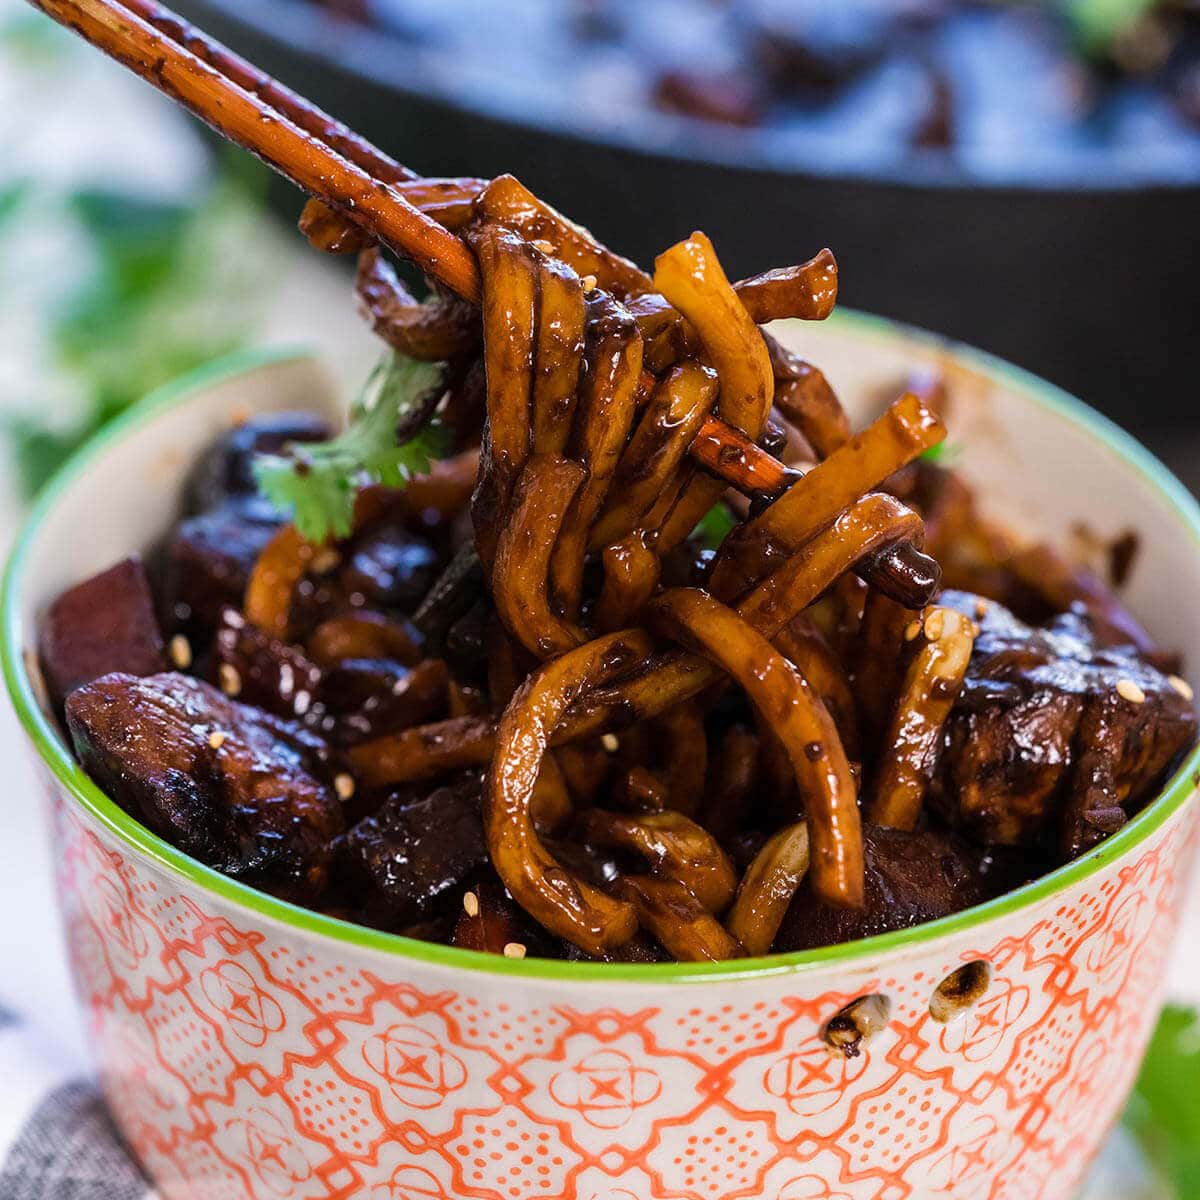 jajangmyeon noodles in a bowl being served with chopsticks.